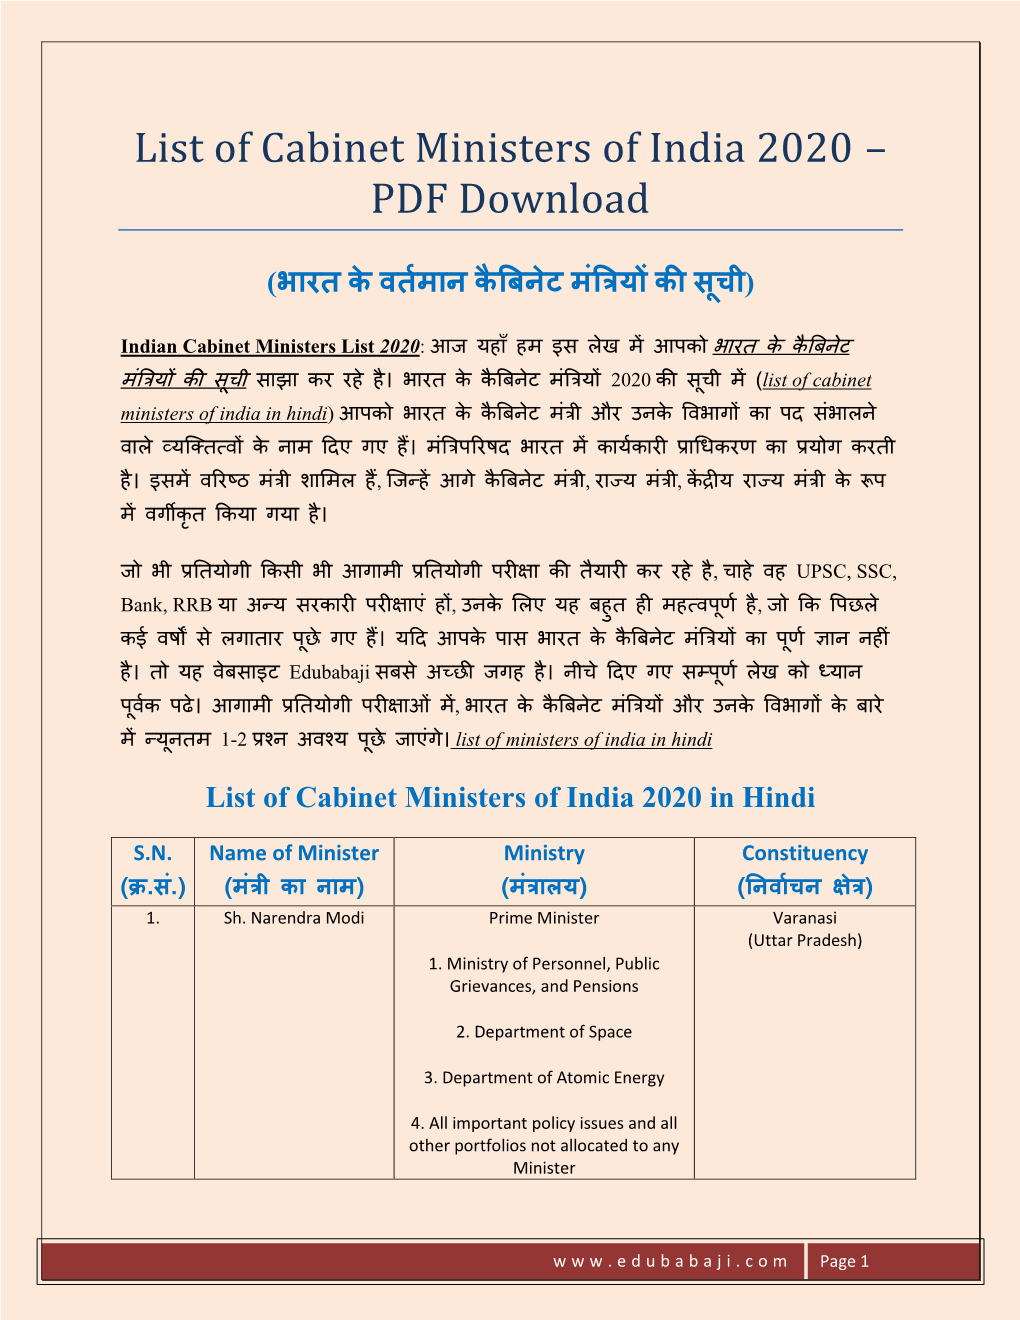 List of Cabinet Ministers of India 2020 – PDF Download